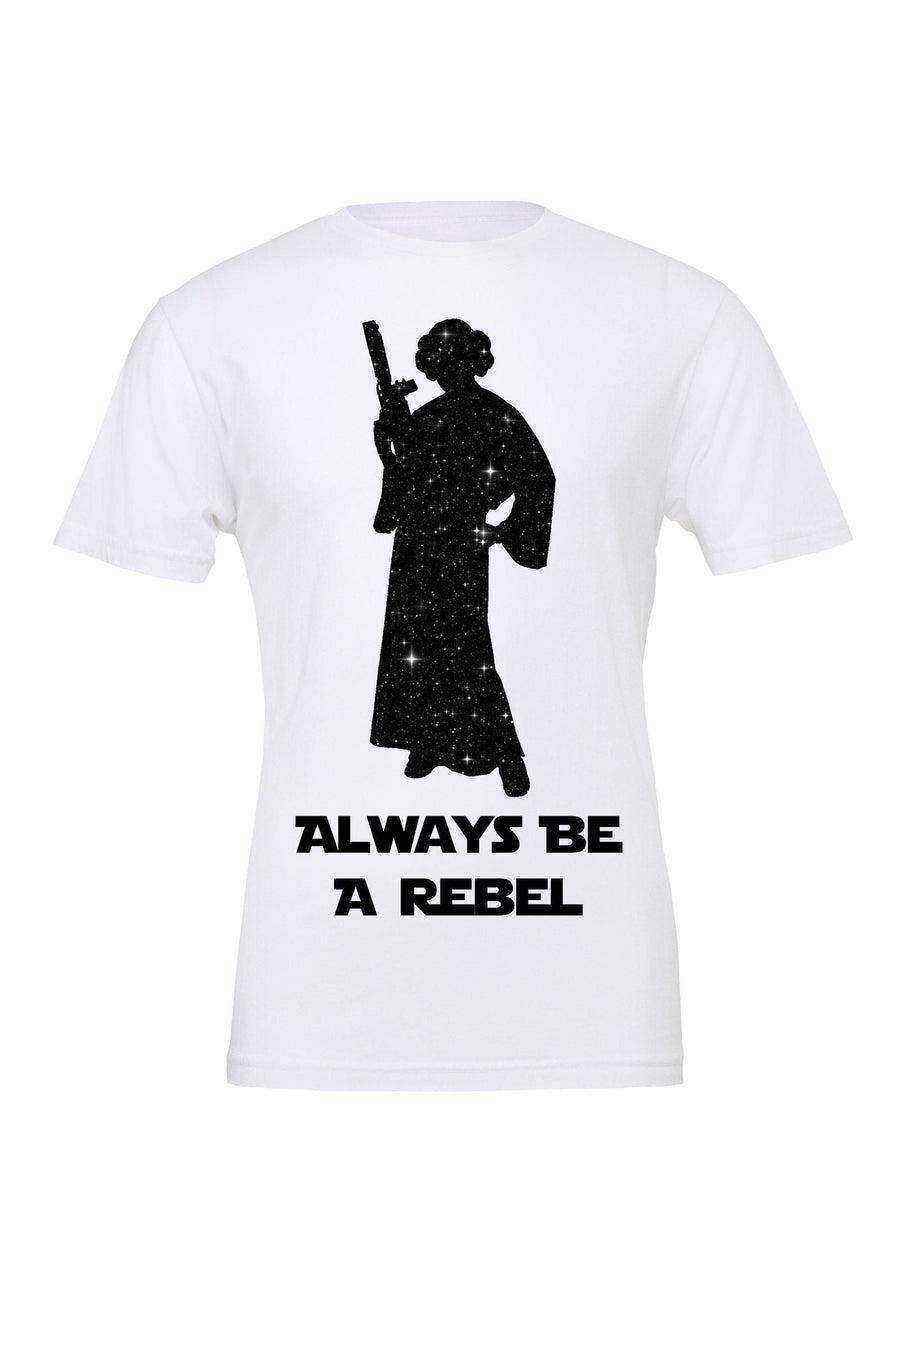 Womens | Star Wars Princess Leia Galaxy Background Tee | Always Be A Rebel - Dylan's Tees